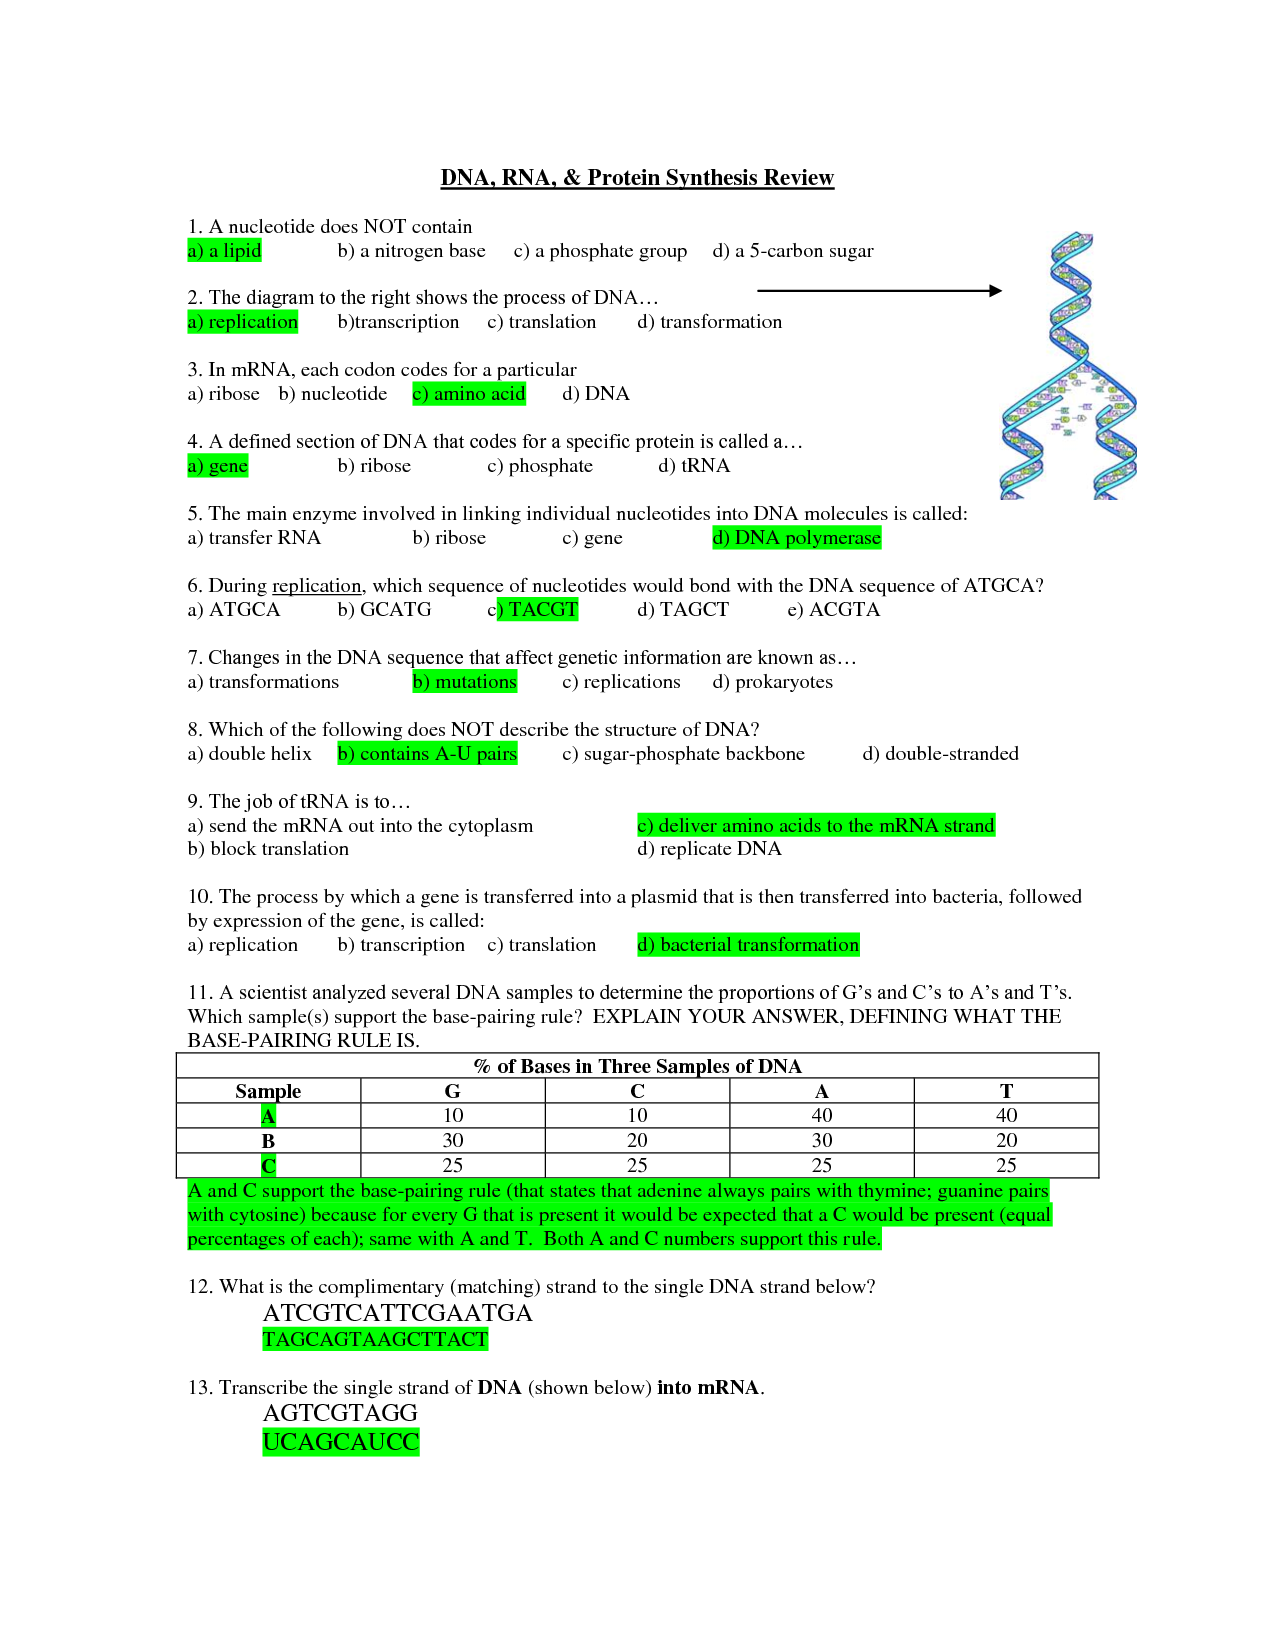 dna-rna-and-protein-synthesis-test-biological-science-picture